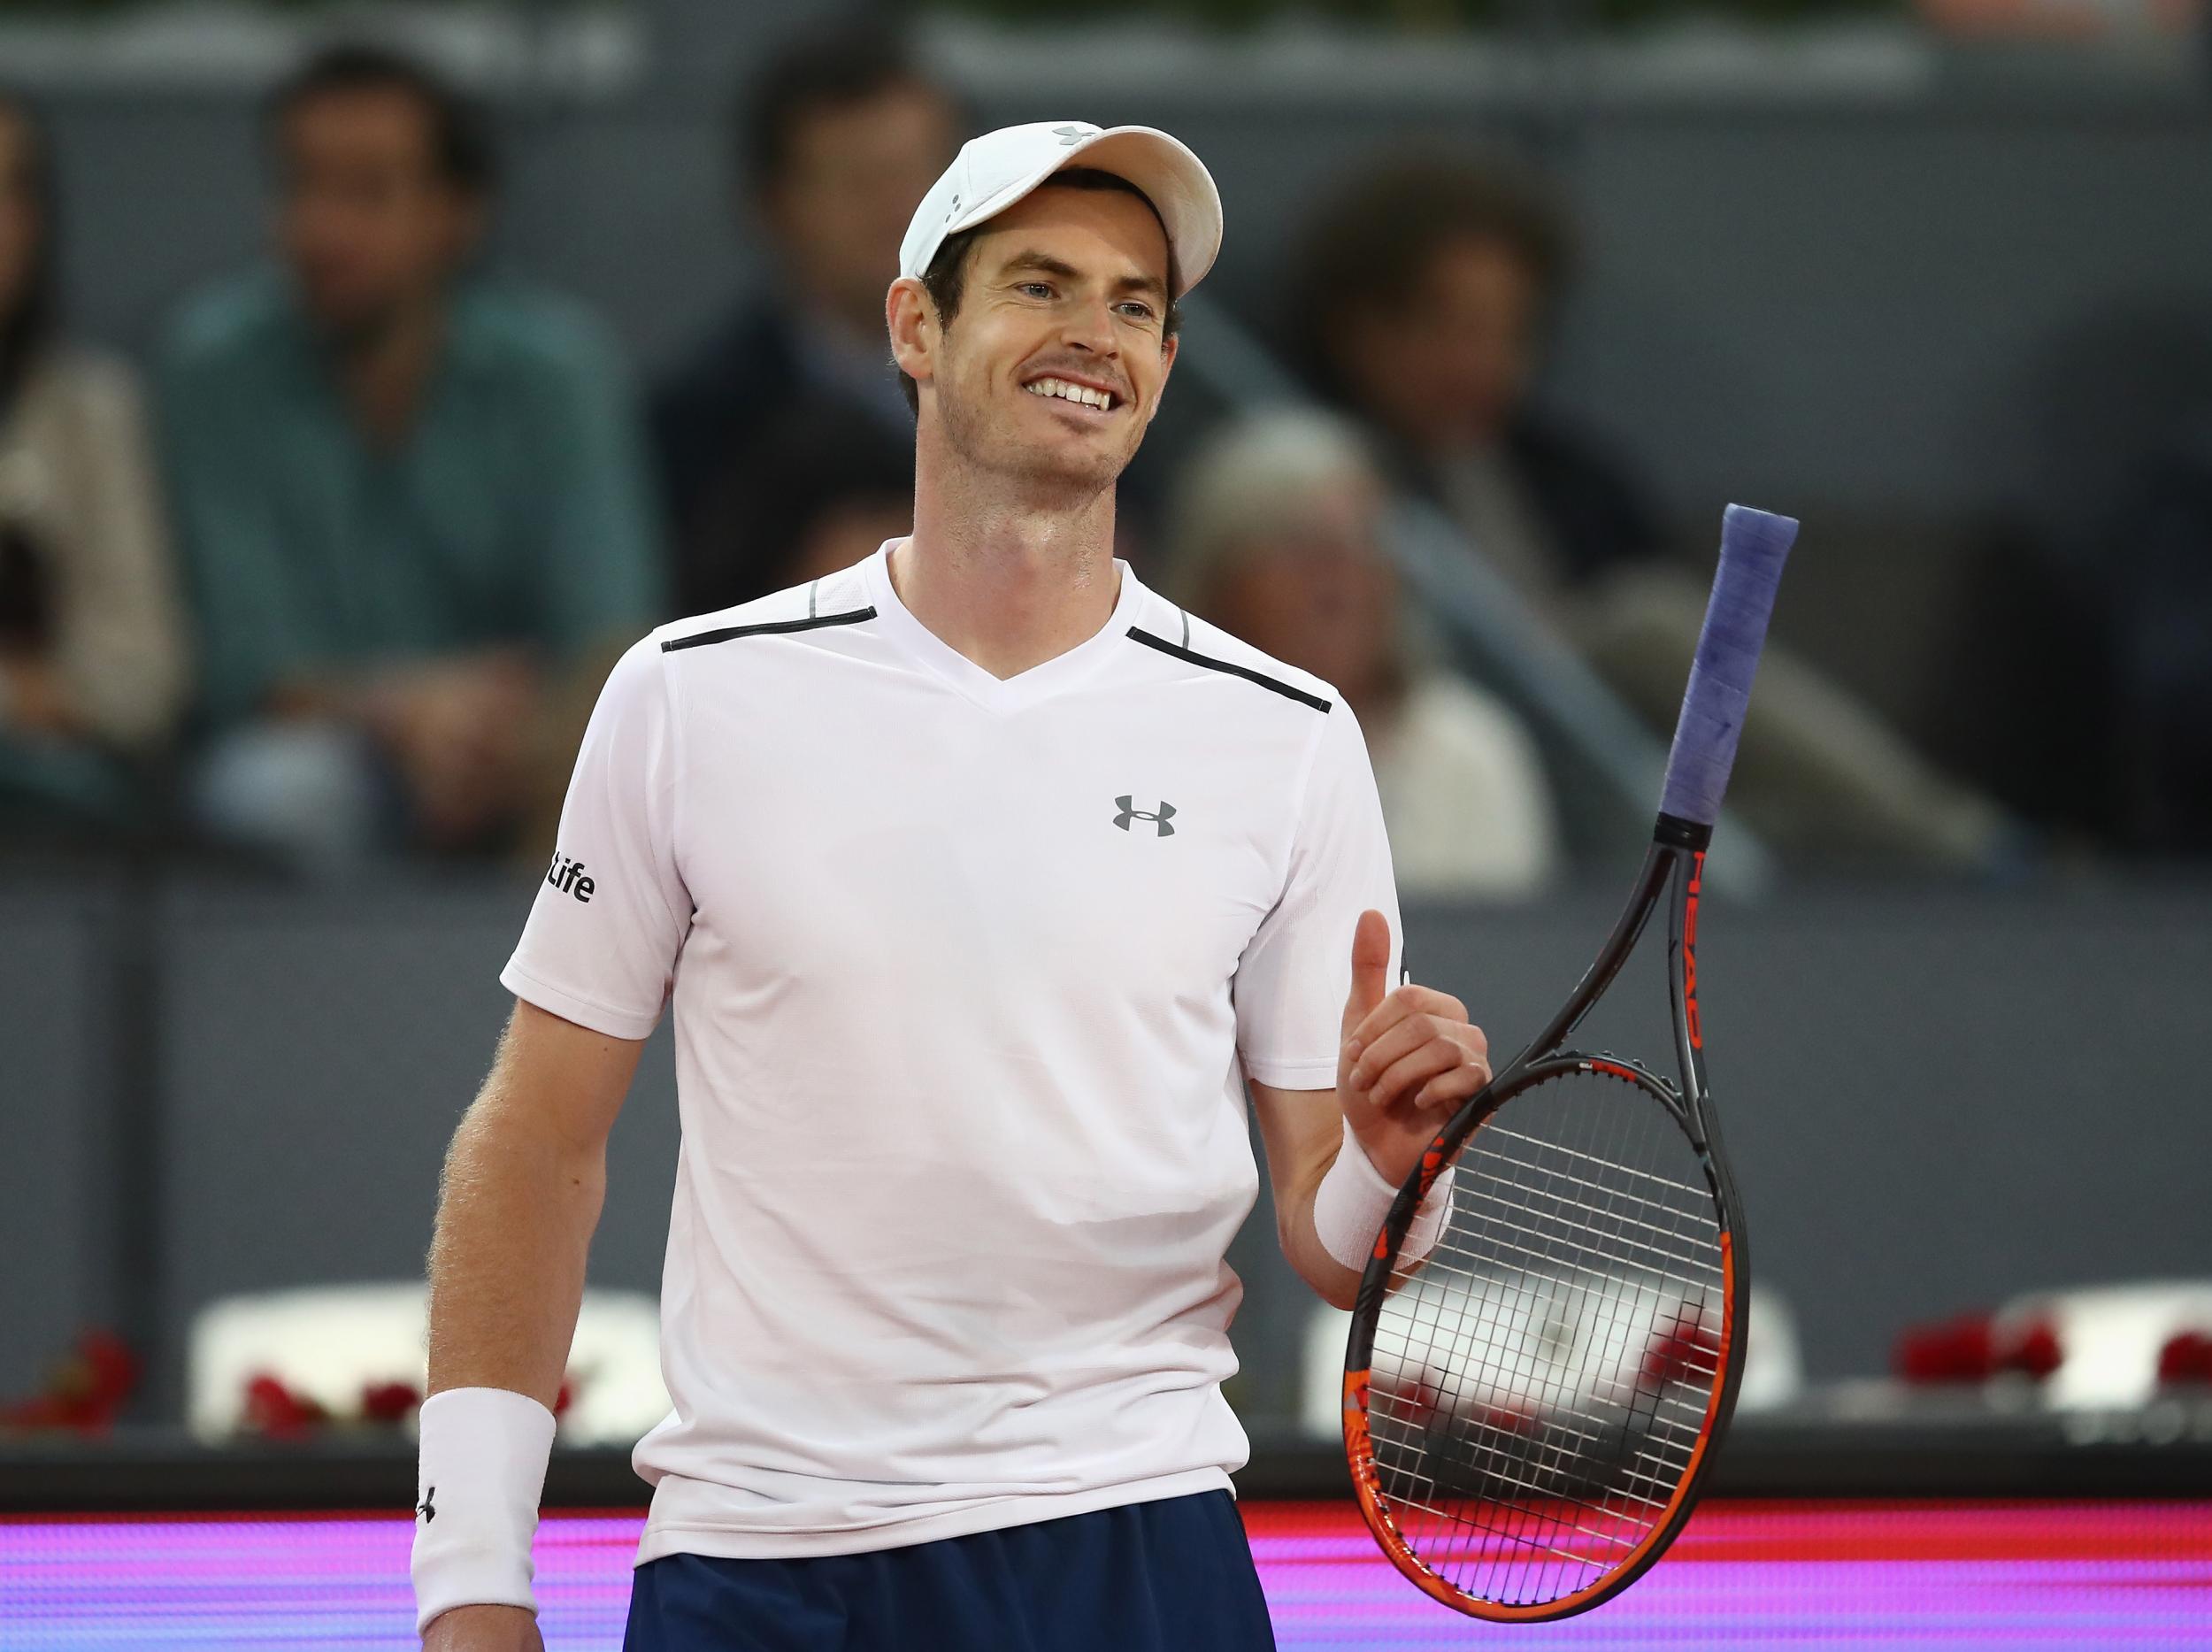 Murray has struggled since reaching the top of the ATP rankings